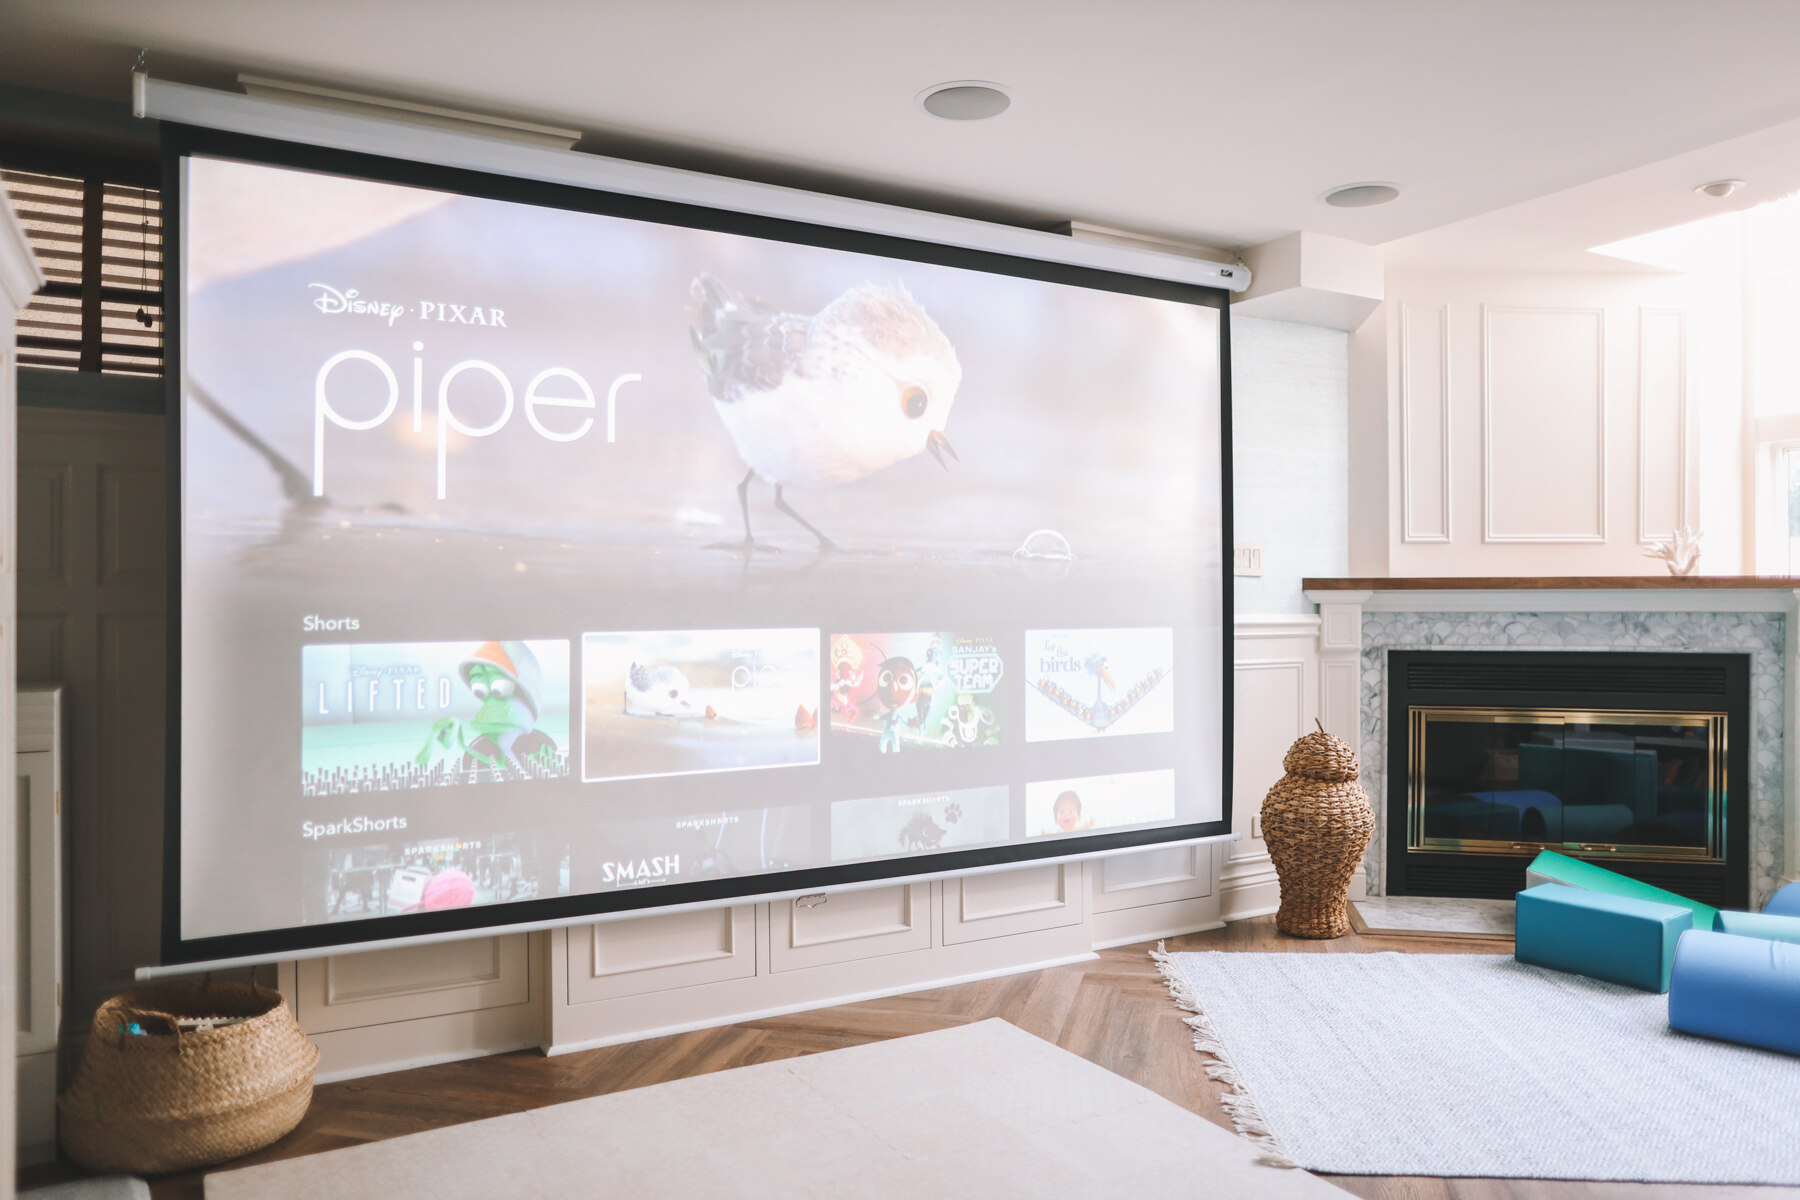 How To Set Up Projector Screen